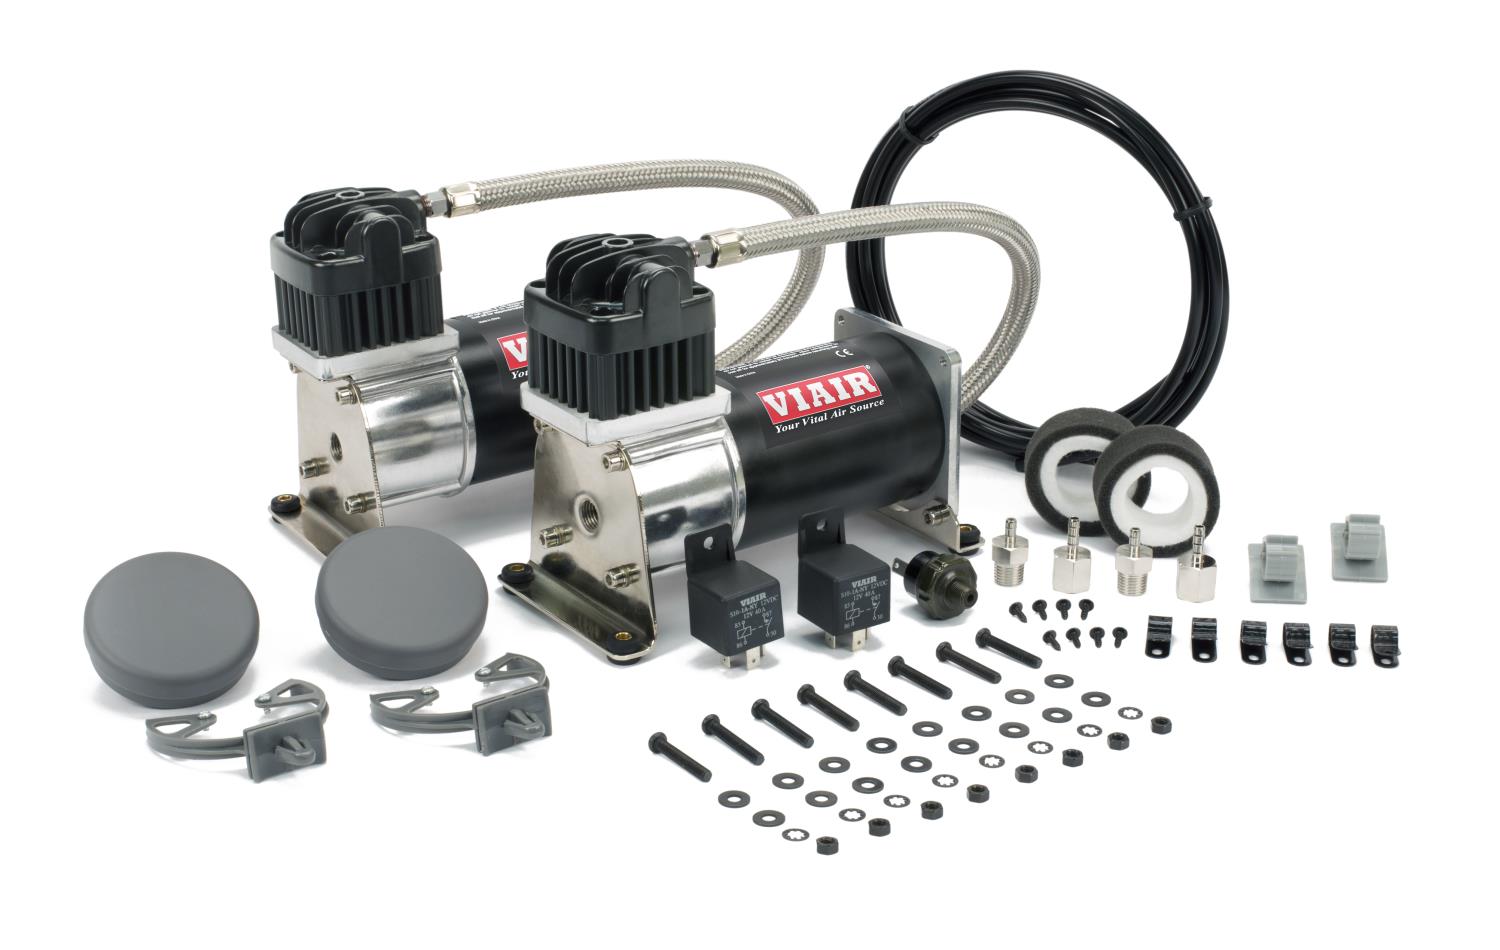 280C Dual Performance Air Compressor Value Pack Heavy